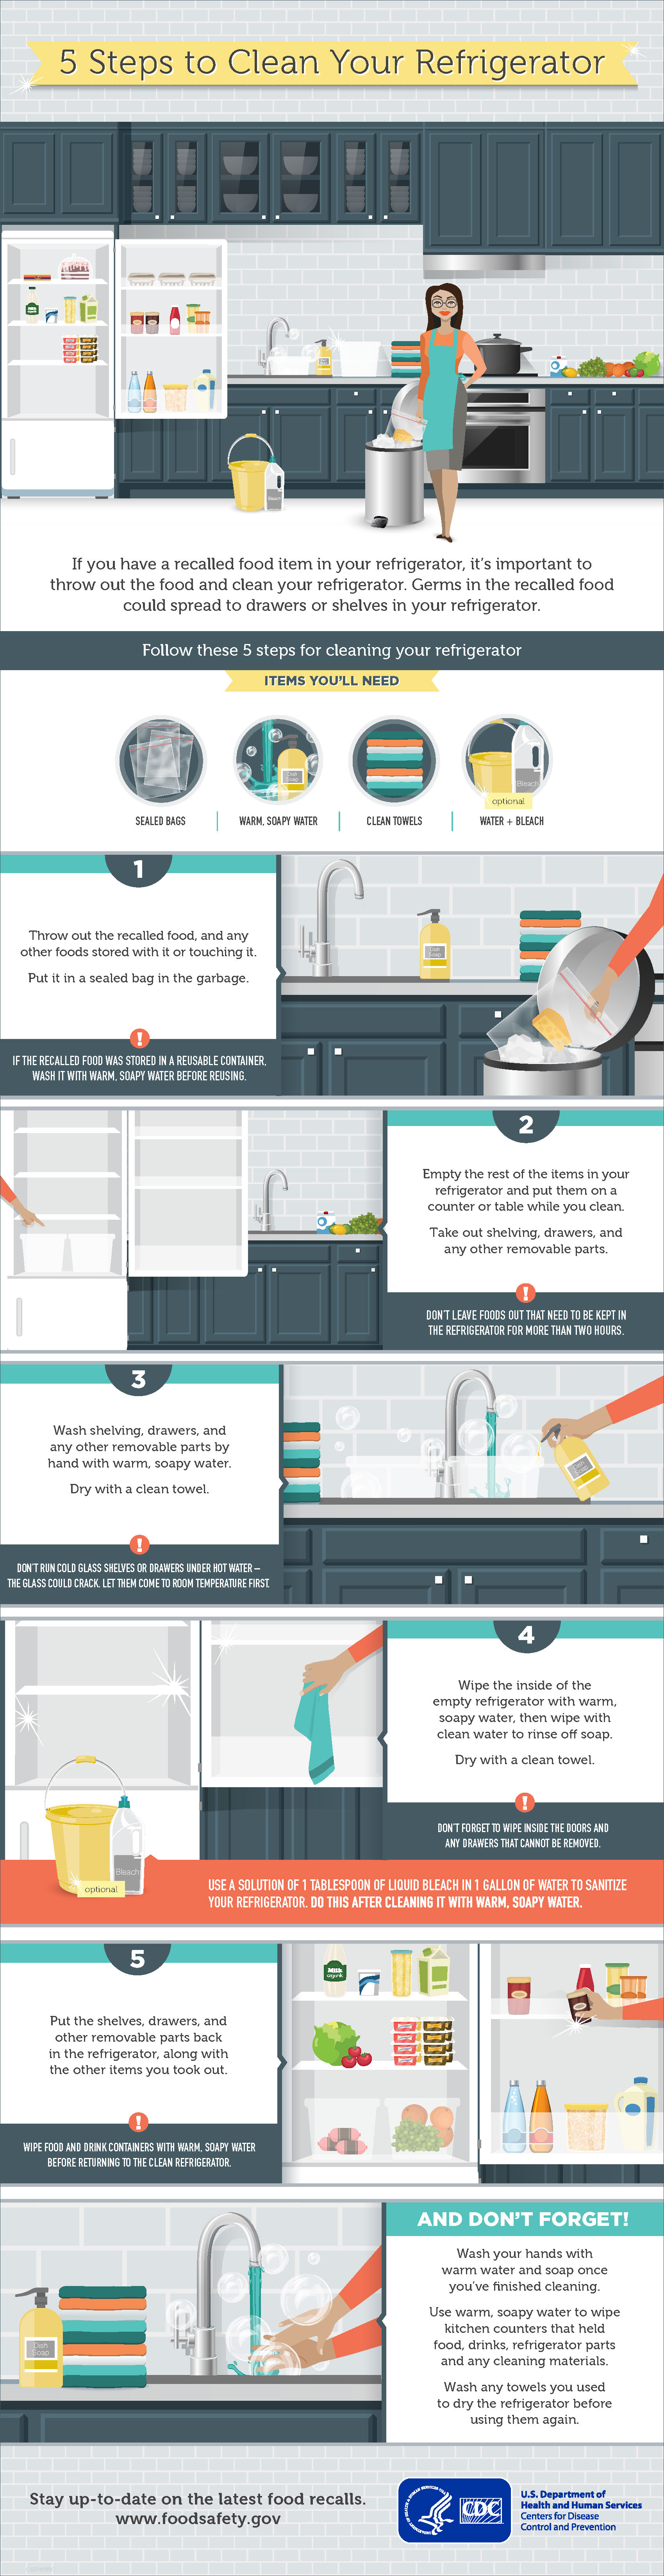 A graphic depicts the steps to take to clean a refrigerator after storing a recalled food item.